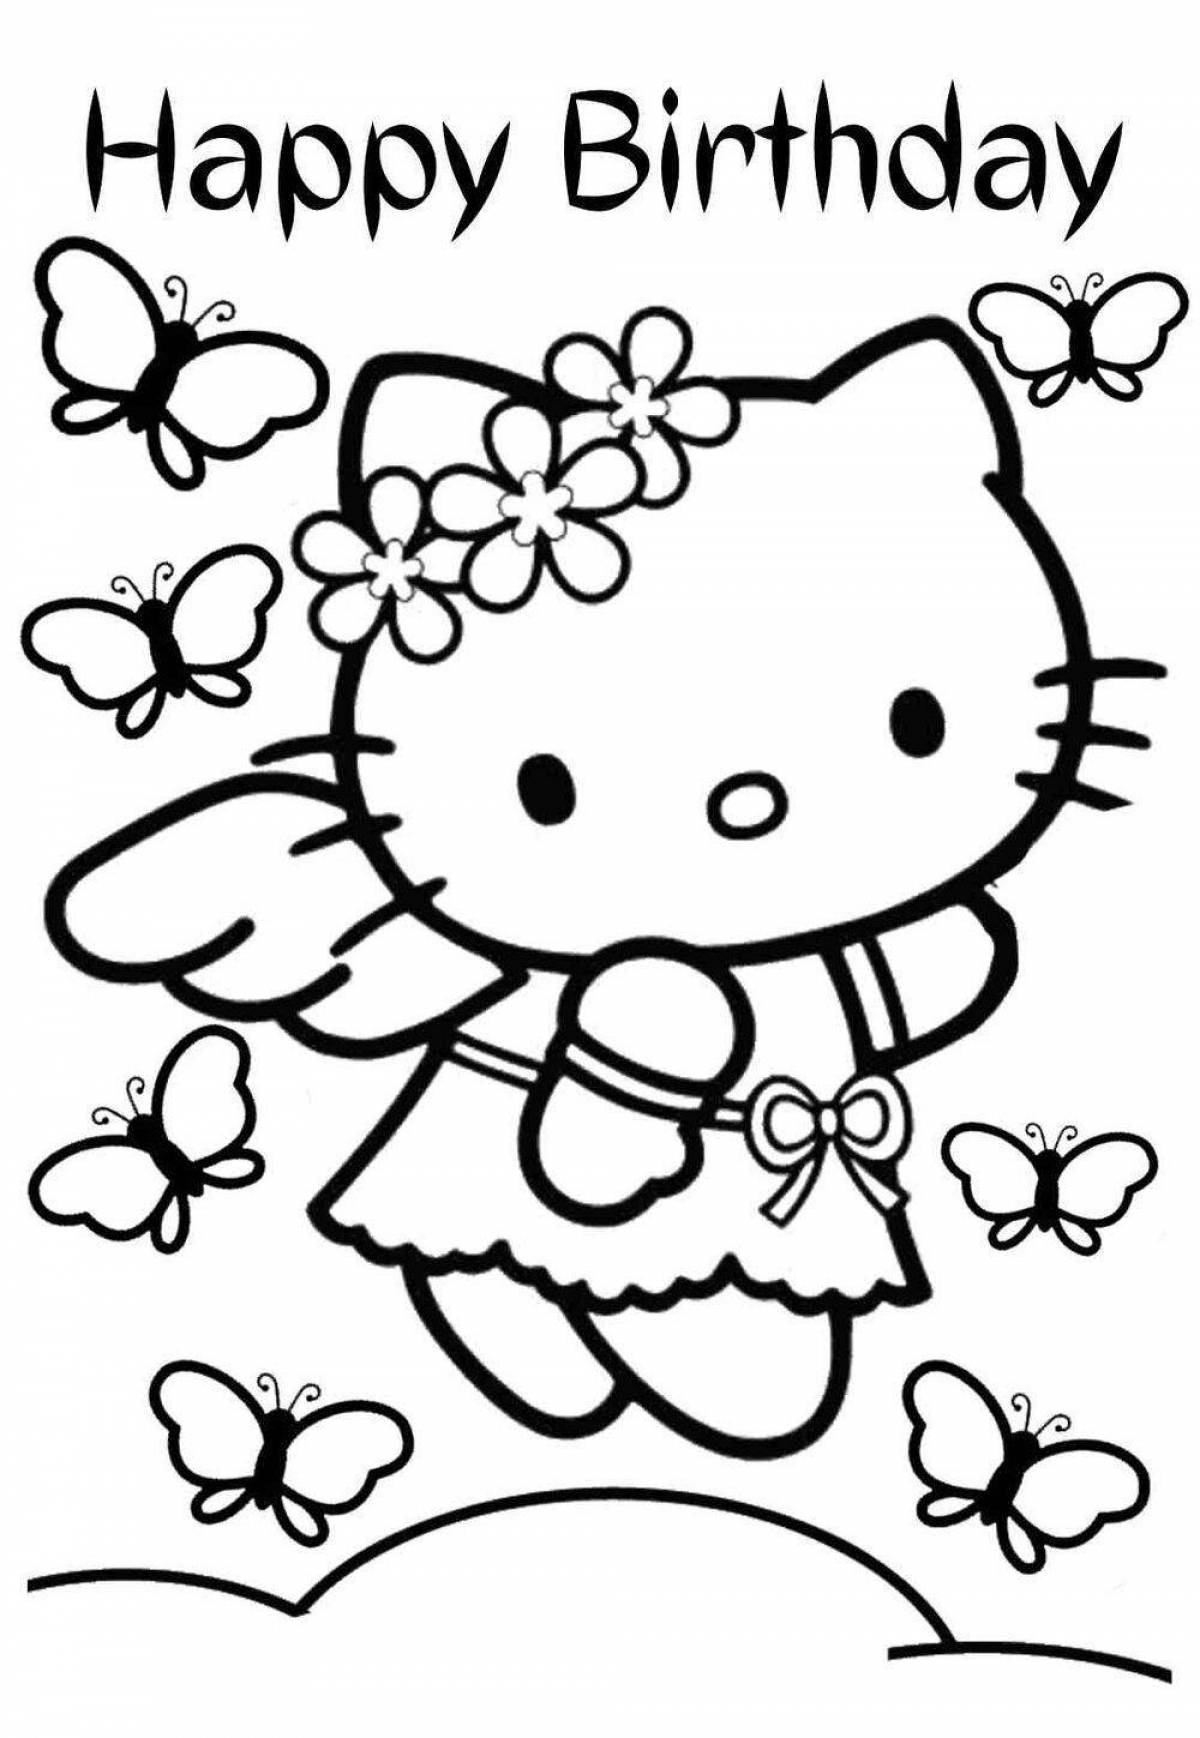 Exquisite hello kitty bunny coloring book